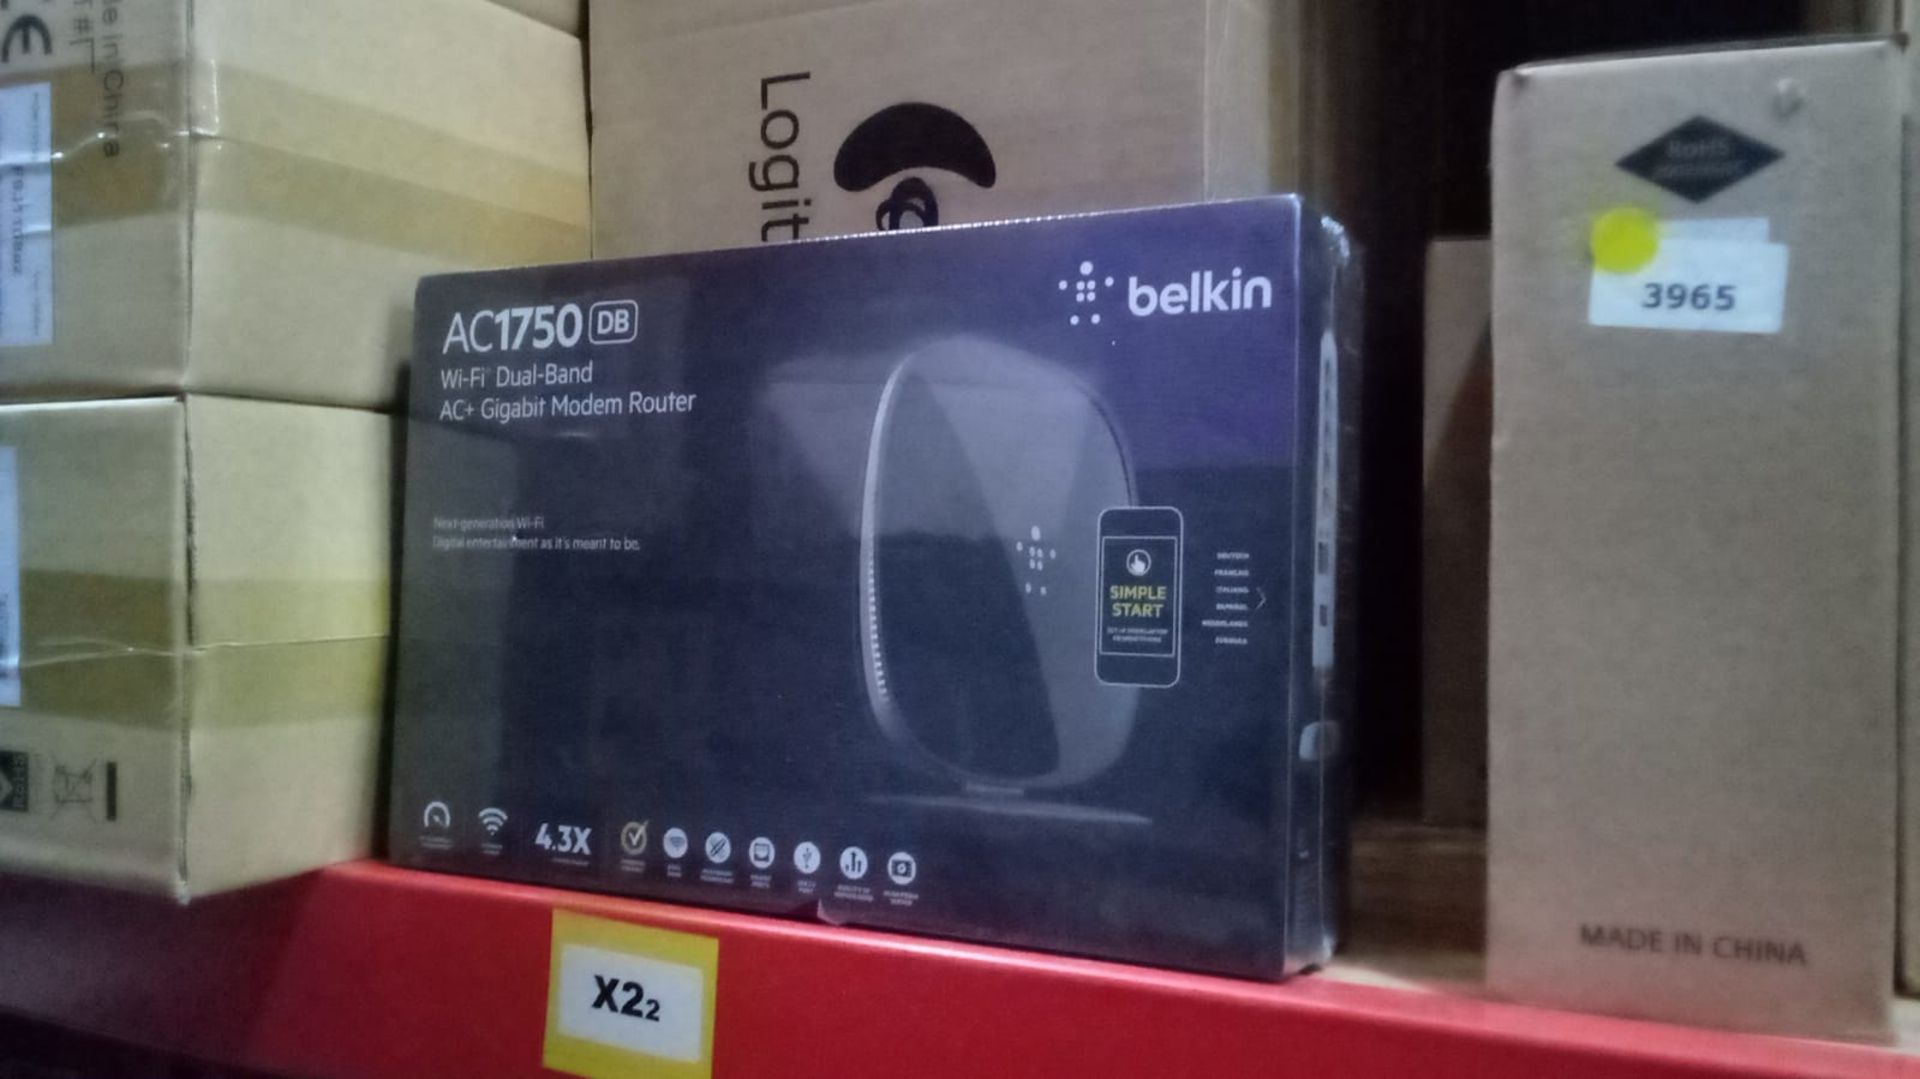 50pcs - Sealed Belkin AC1750 Dual Band WiFi Gigabit Moden Router Euro Plug - Unchecked Untested in